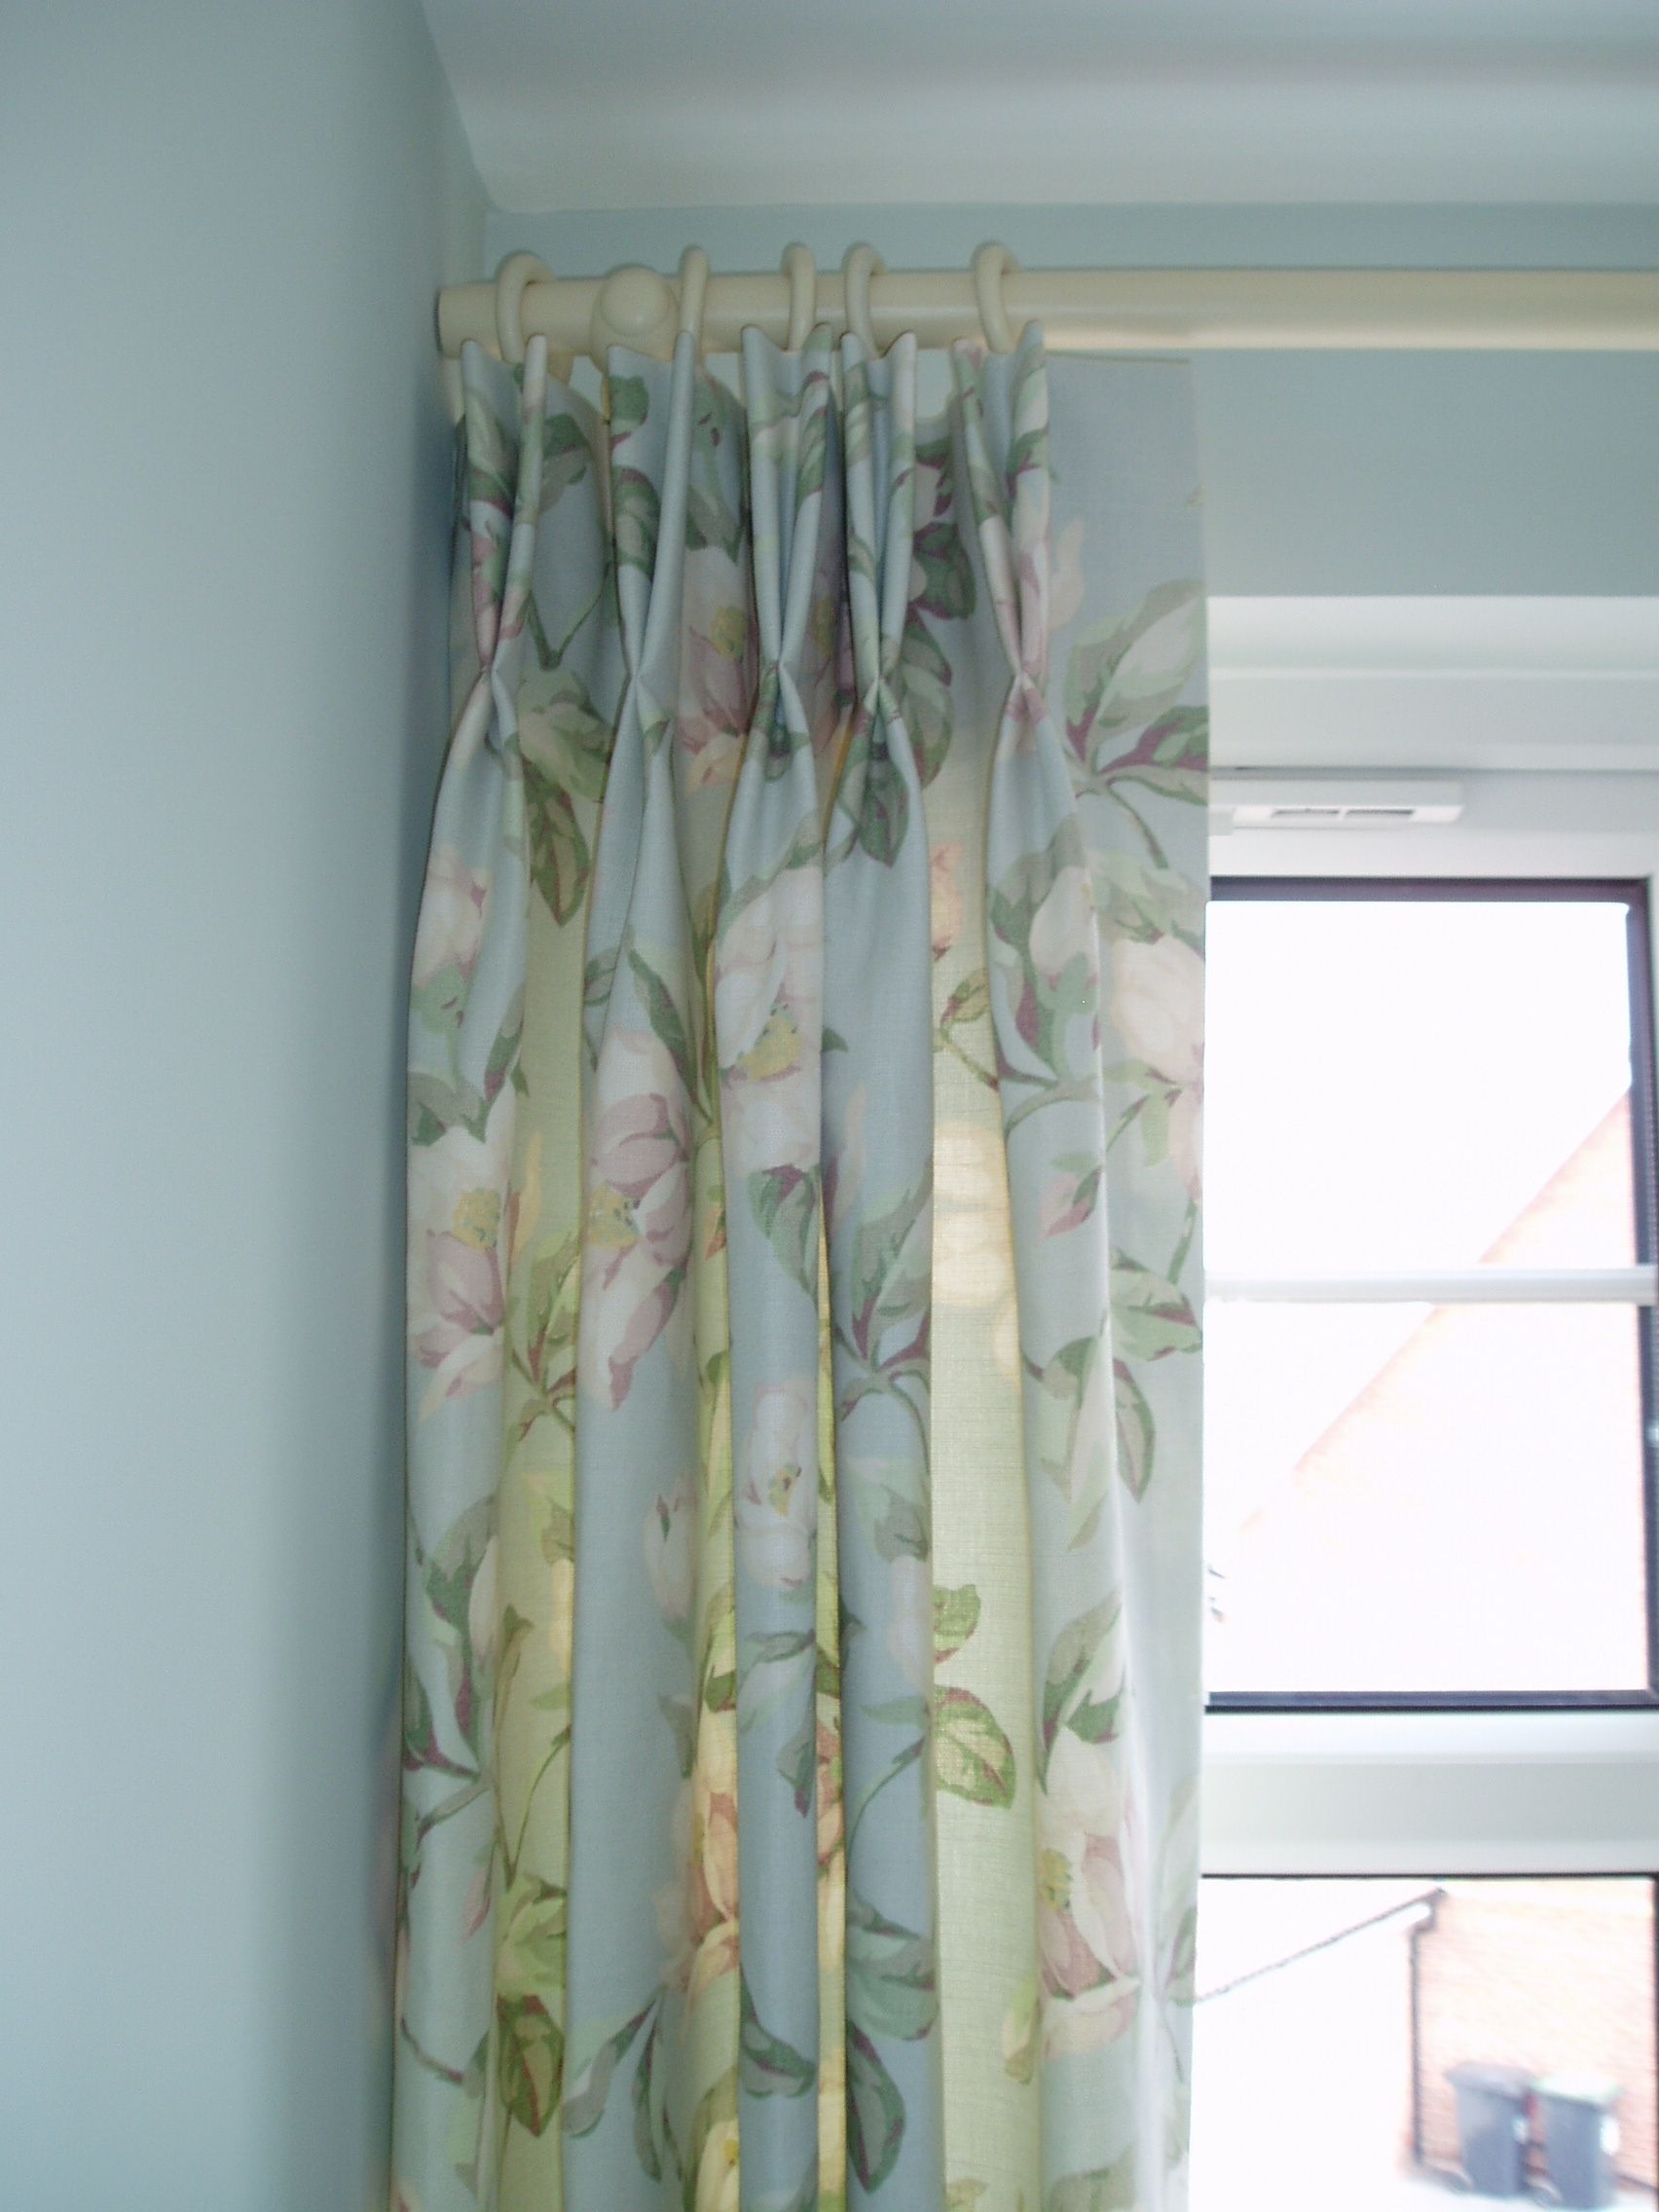 Curtain Poles And Window Treatments Ron And Ron Business Throughout Double Lined Curtains (View 3 of 15)